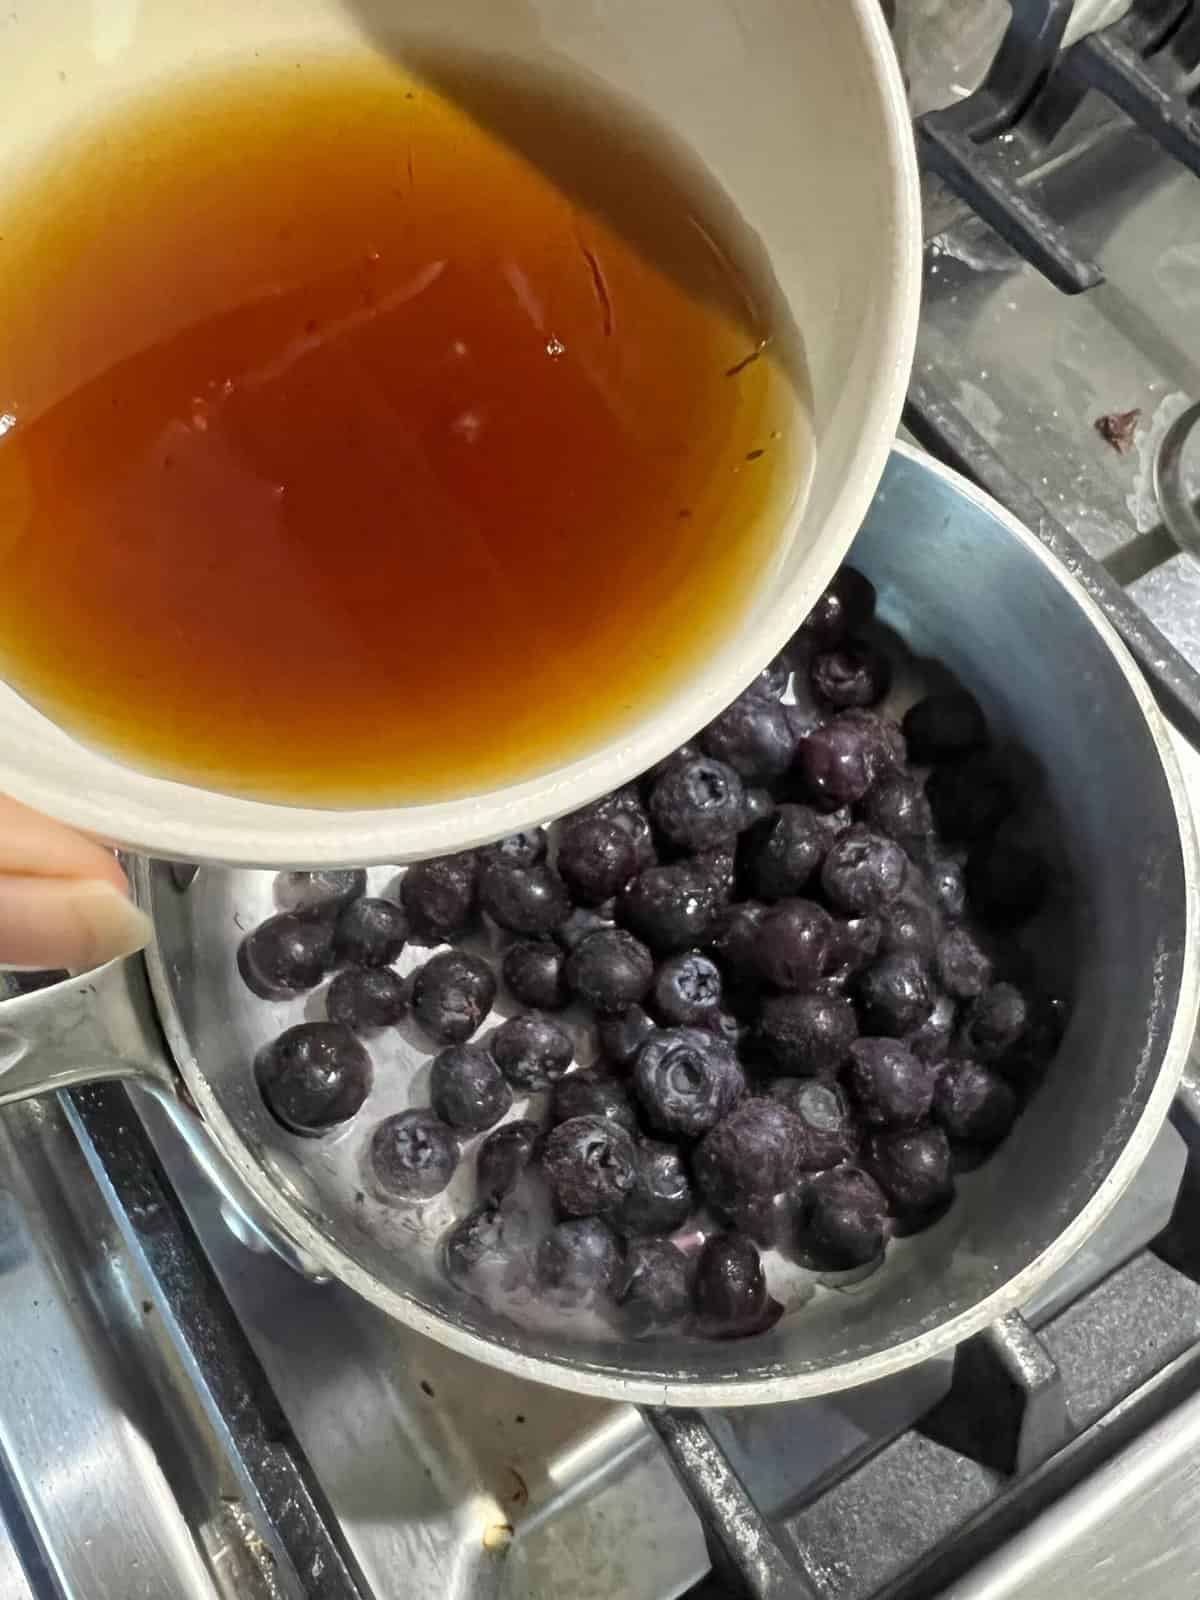 process of adding syrup to bowl of blueberries in a pot